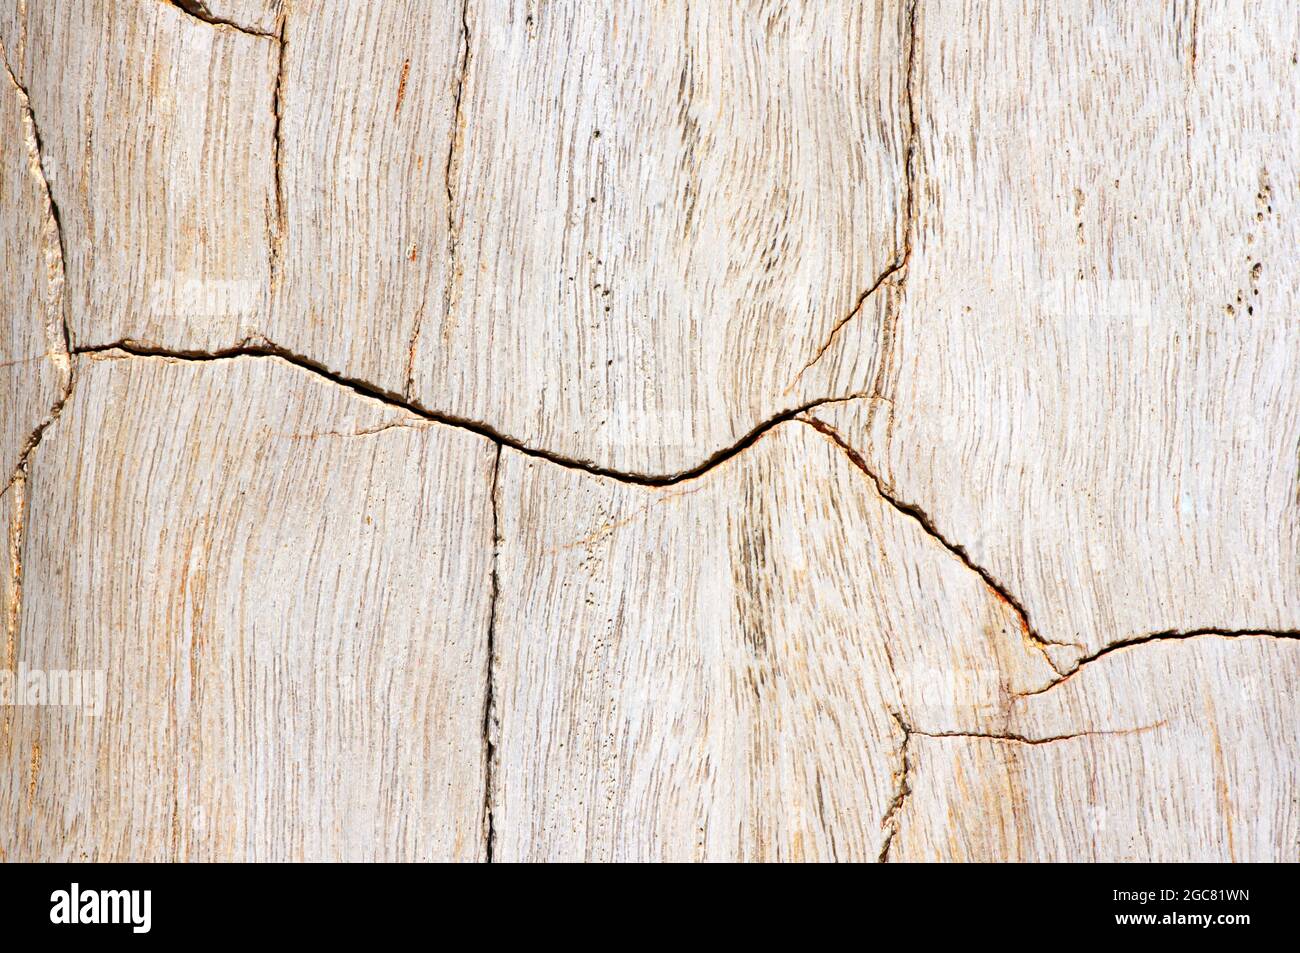 Petrified teak wood, fossil texture in shallow focus, natural background Stock Photo